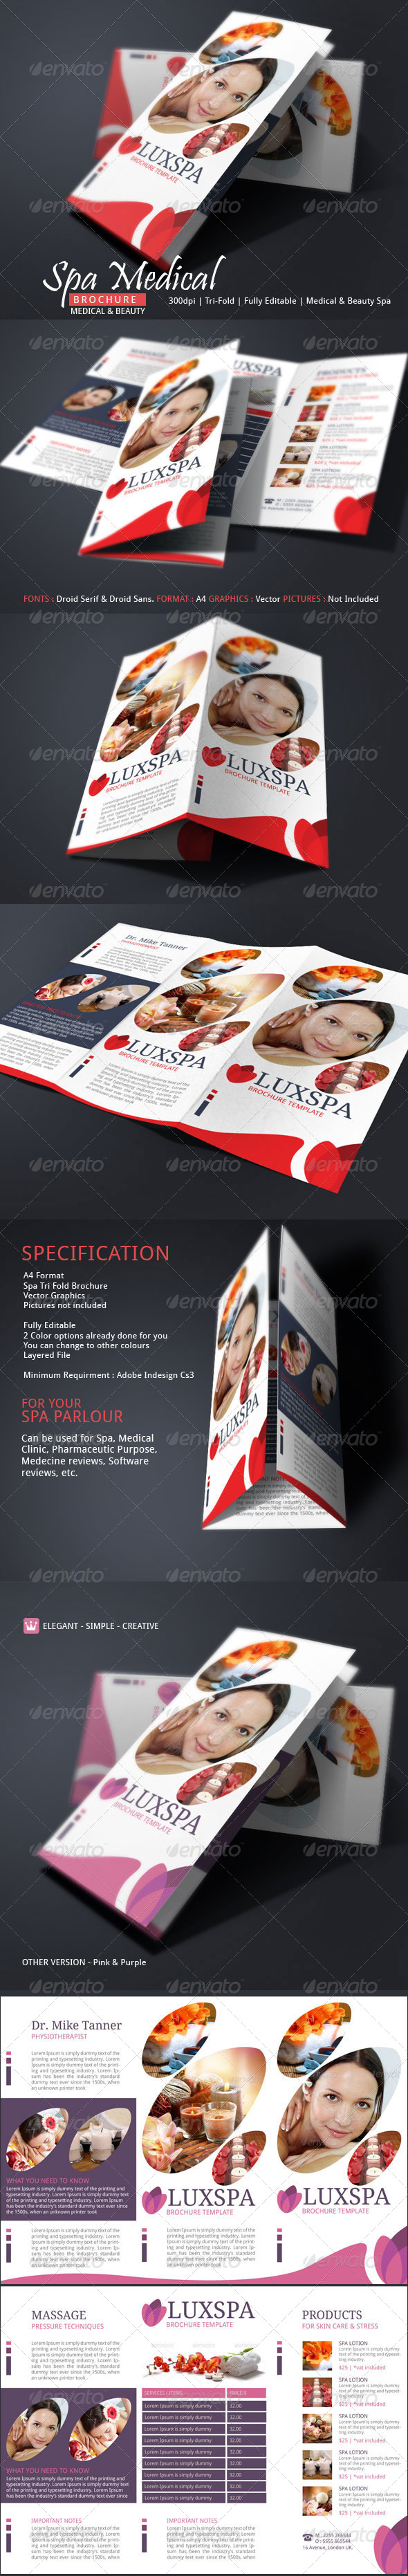 Acupuncture Brochures Template Free